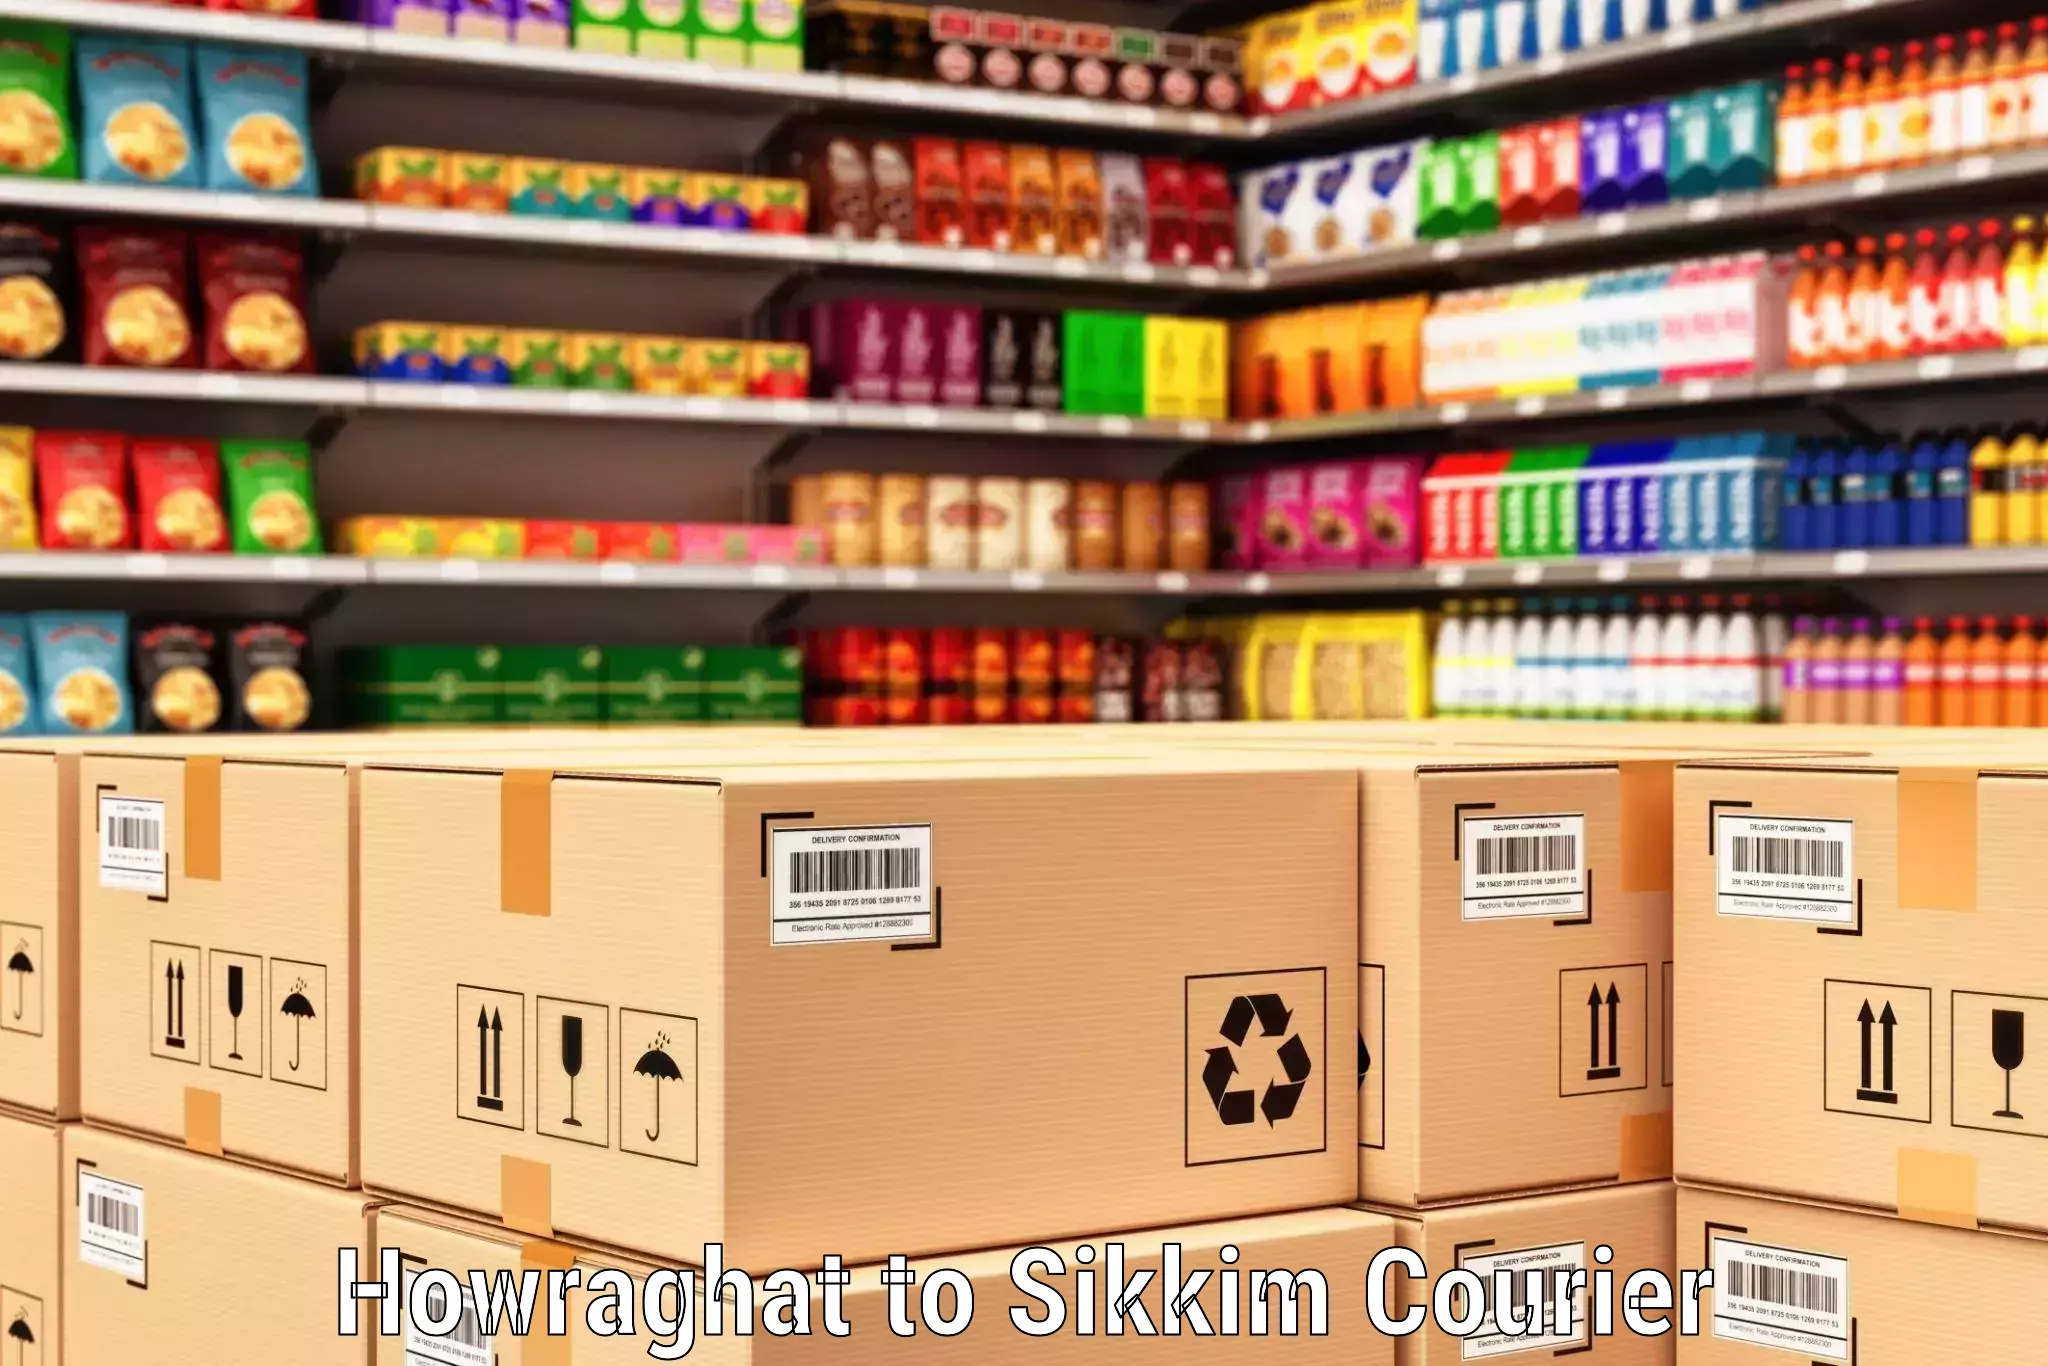 Efficient logistics management Howraghat to South Sikkim